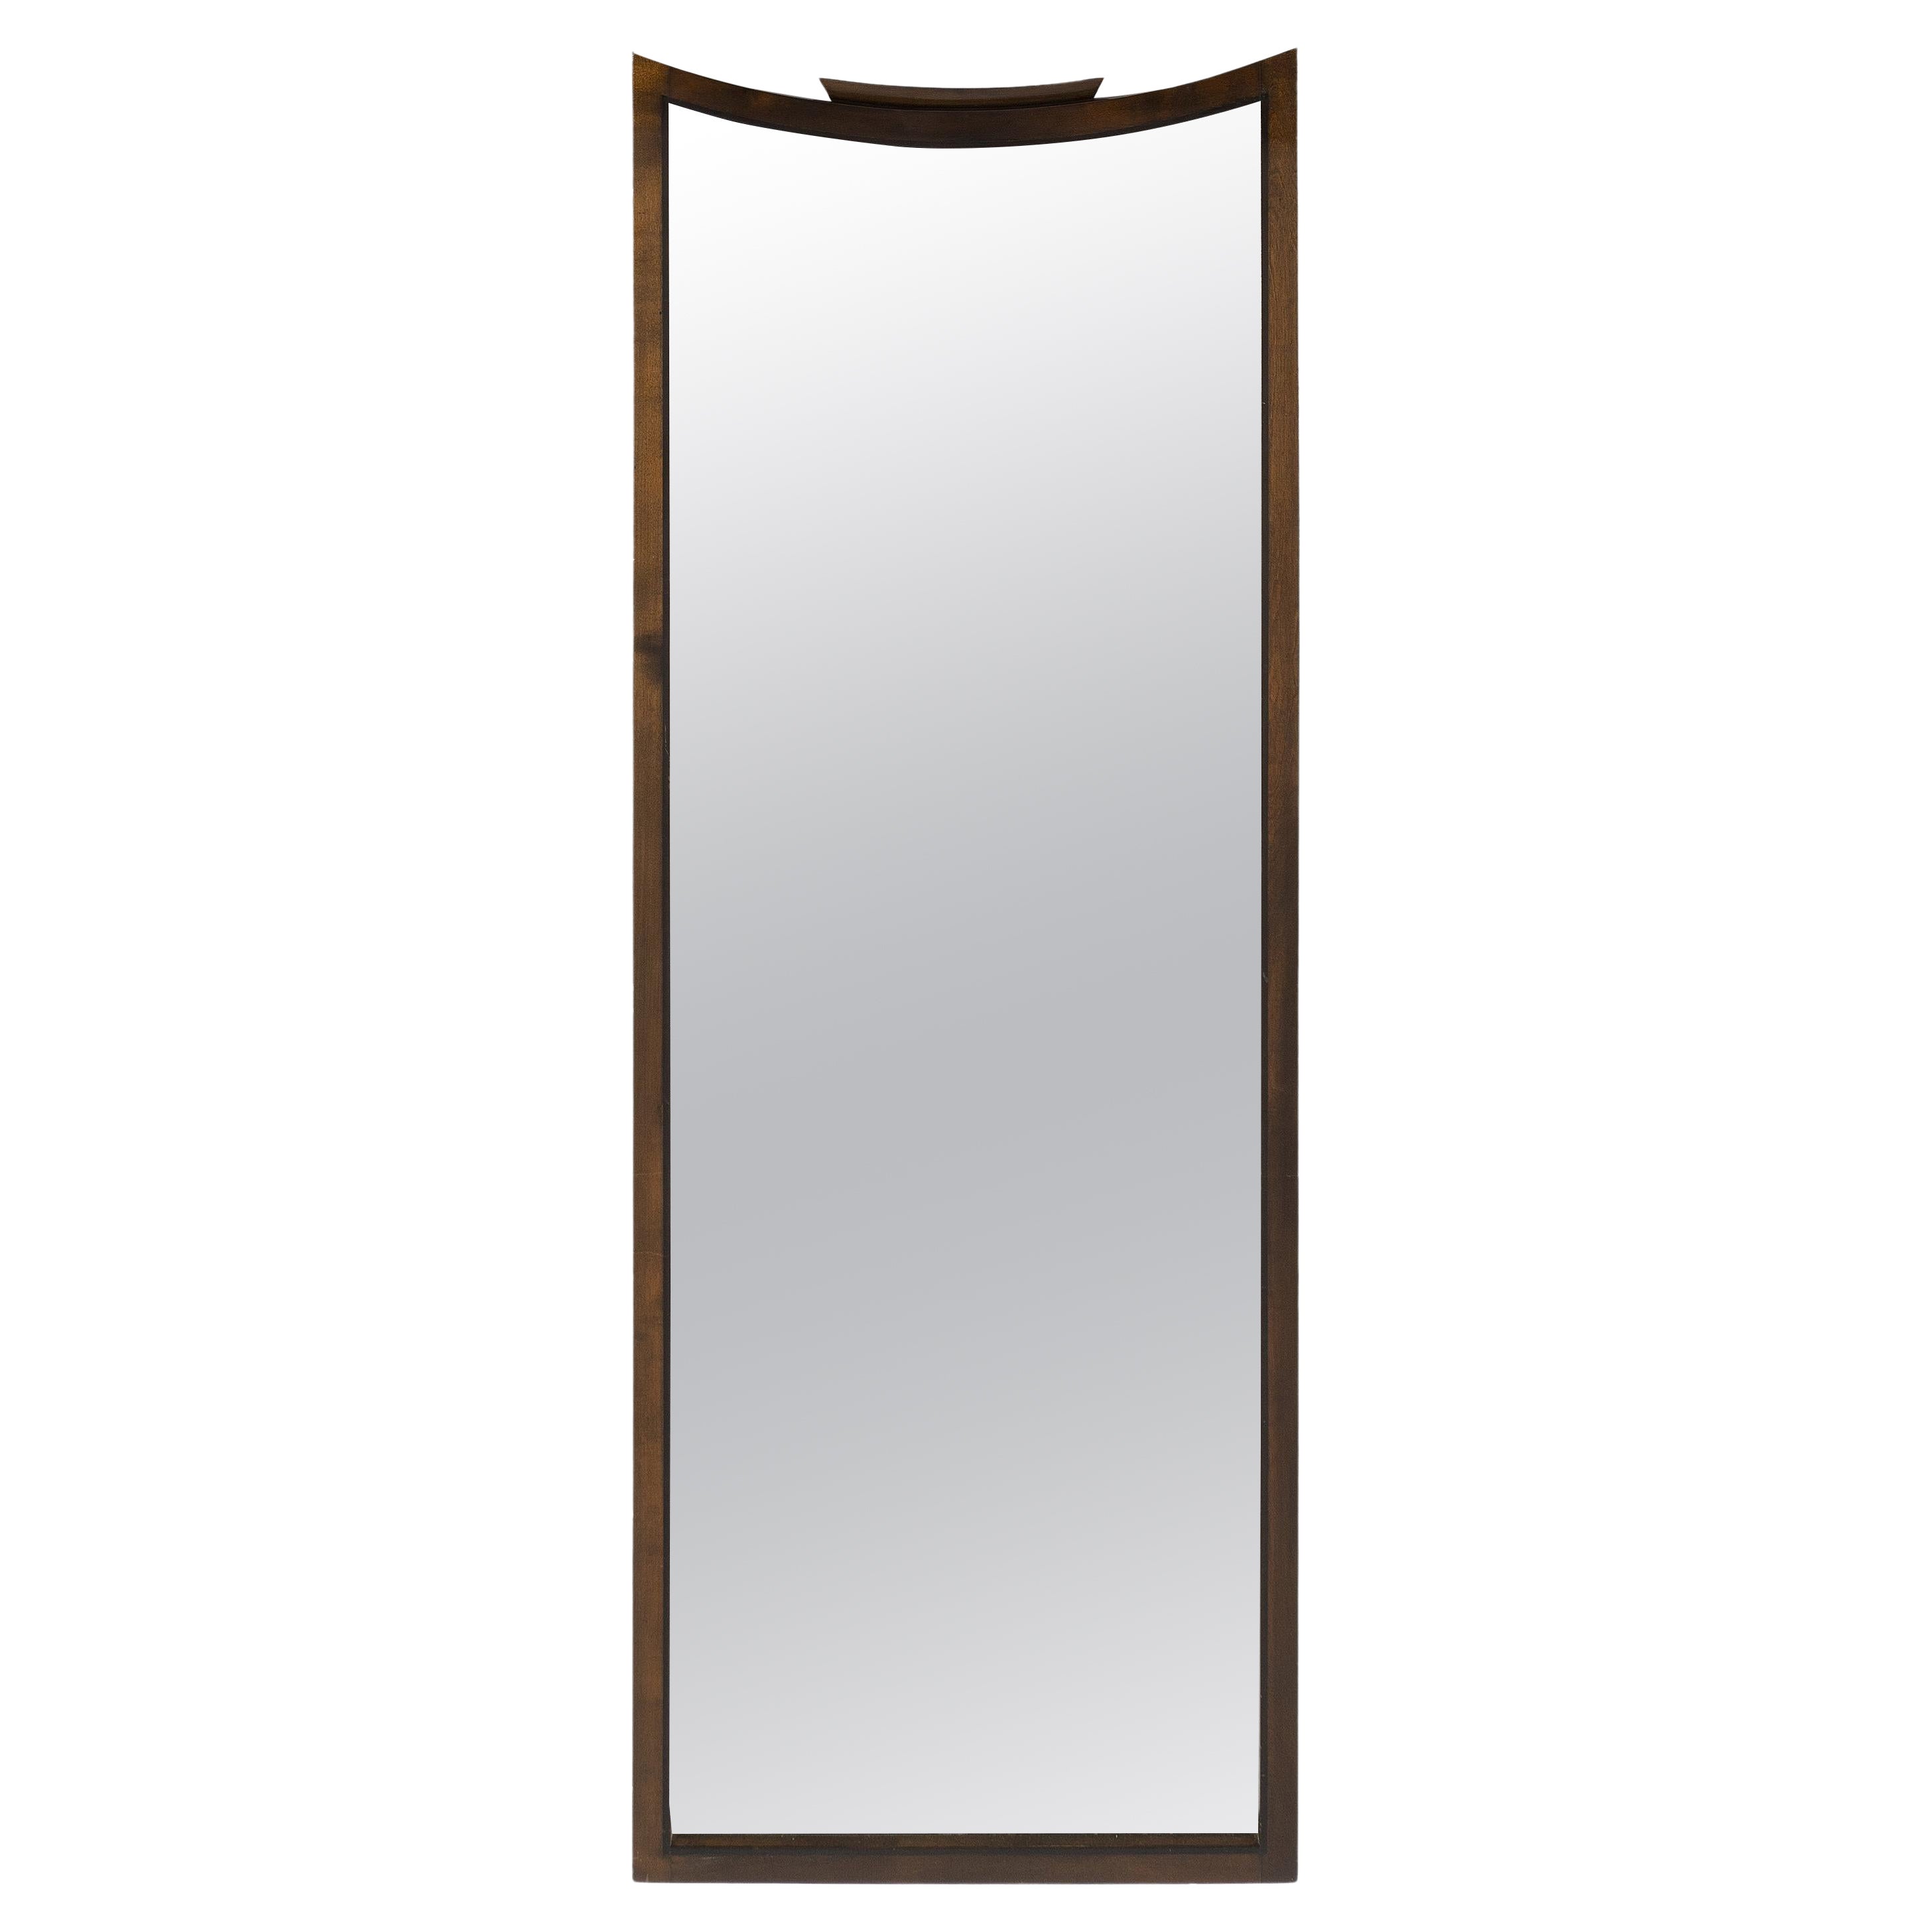 Large Art Deco Mirror, Walnut and Mahogany Frame, Antique Glass, Sweden 1930s. 